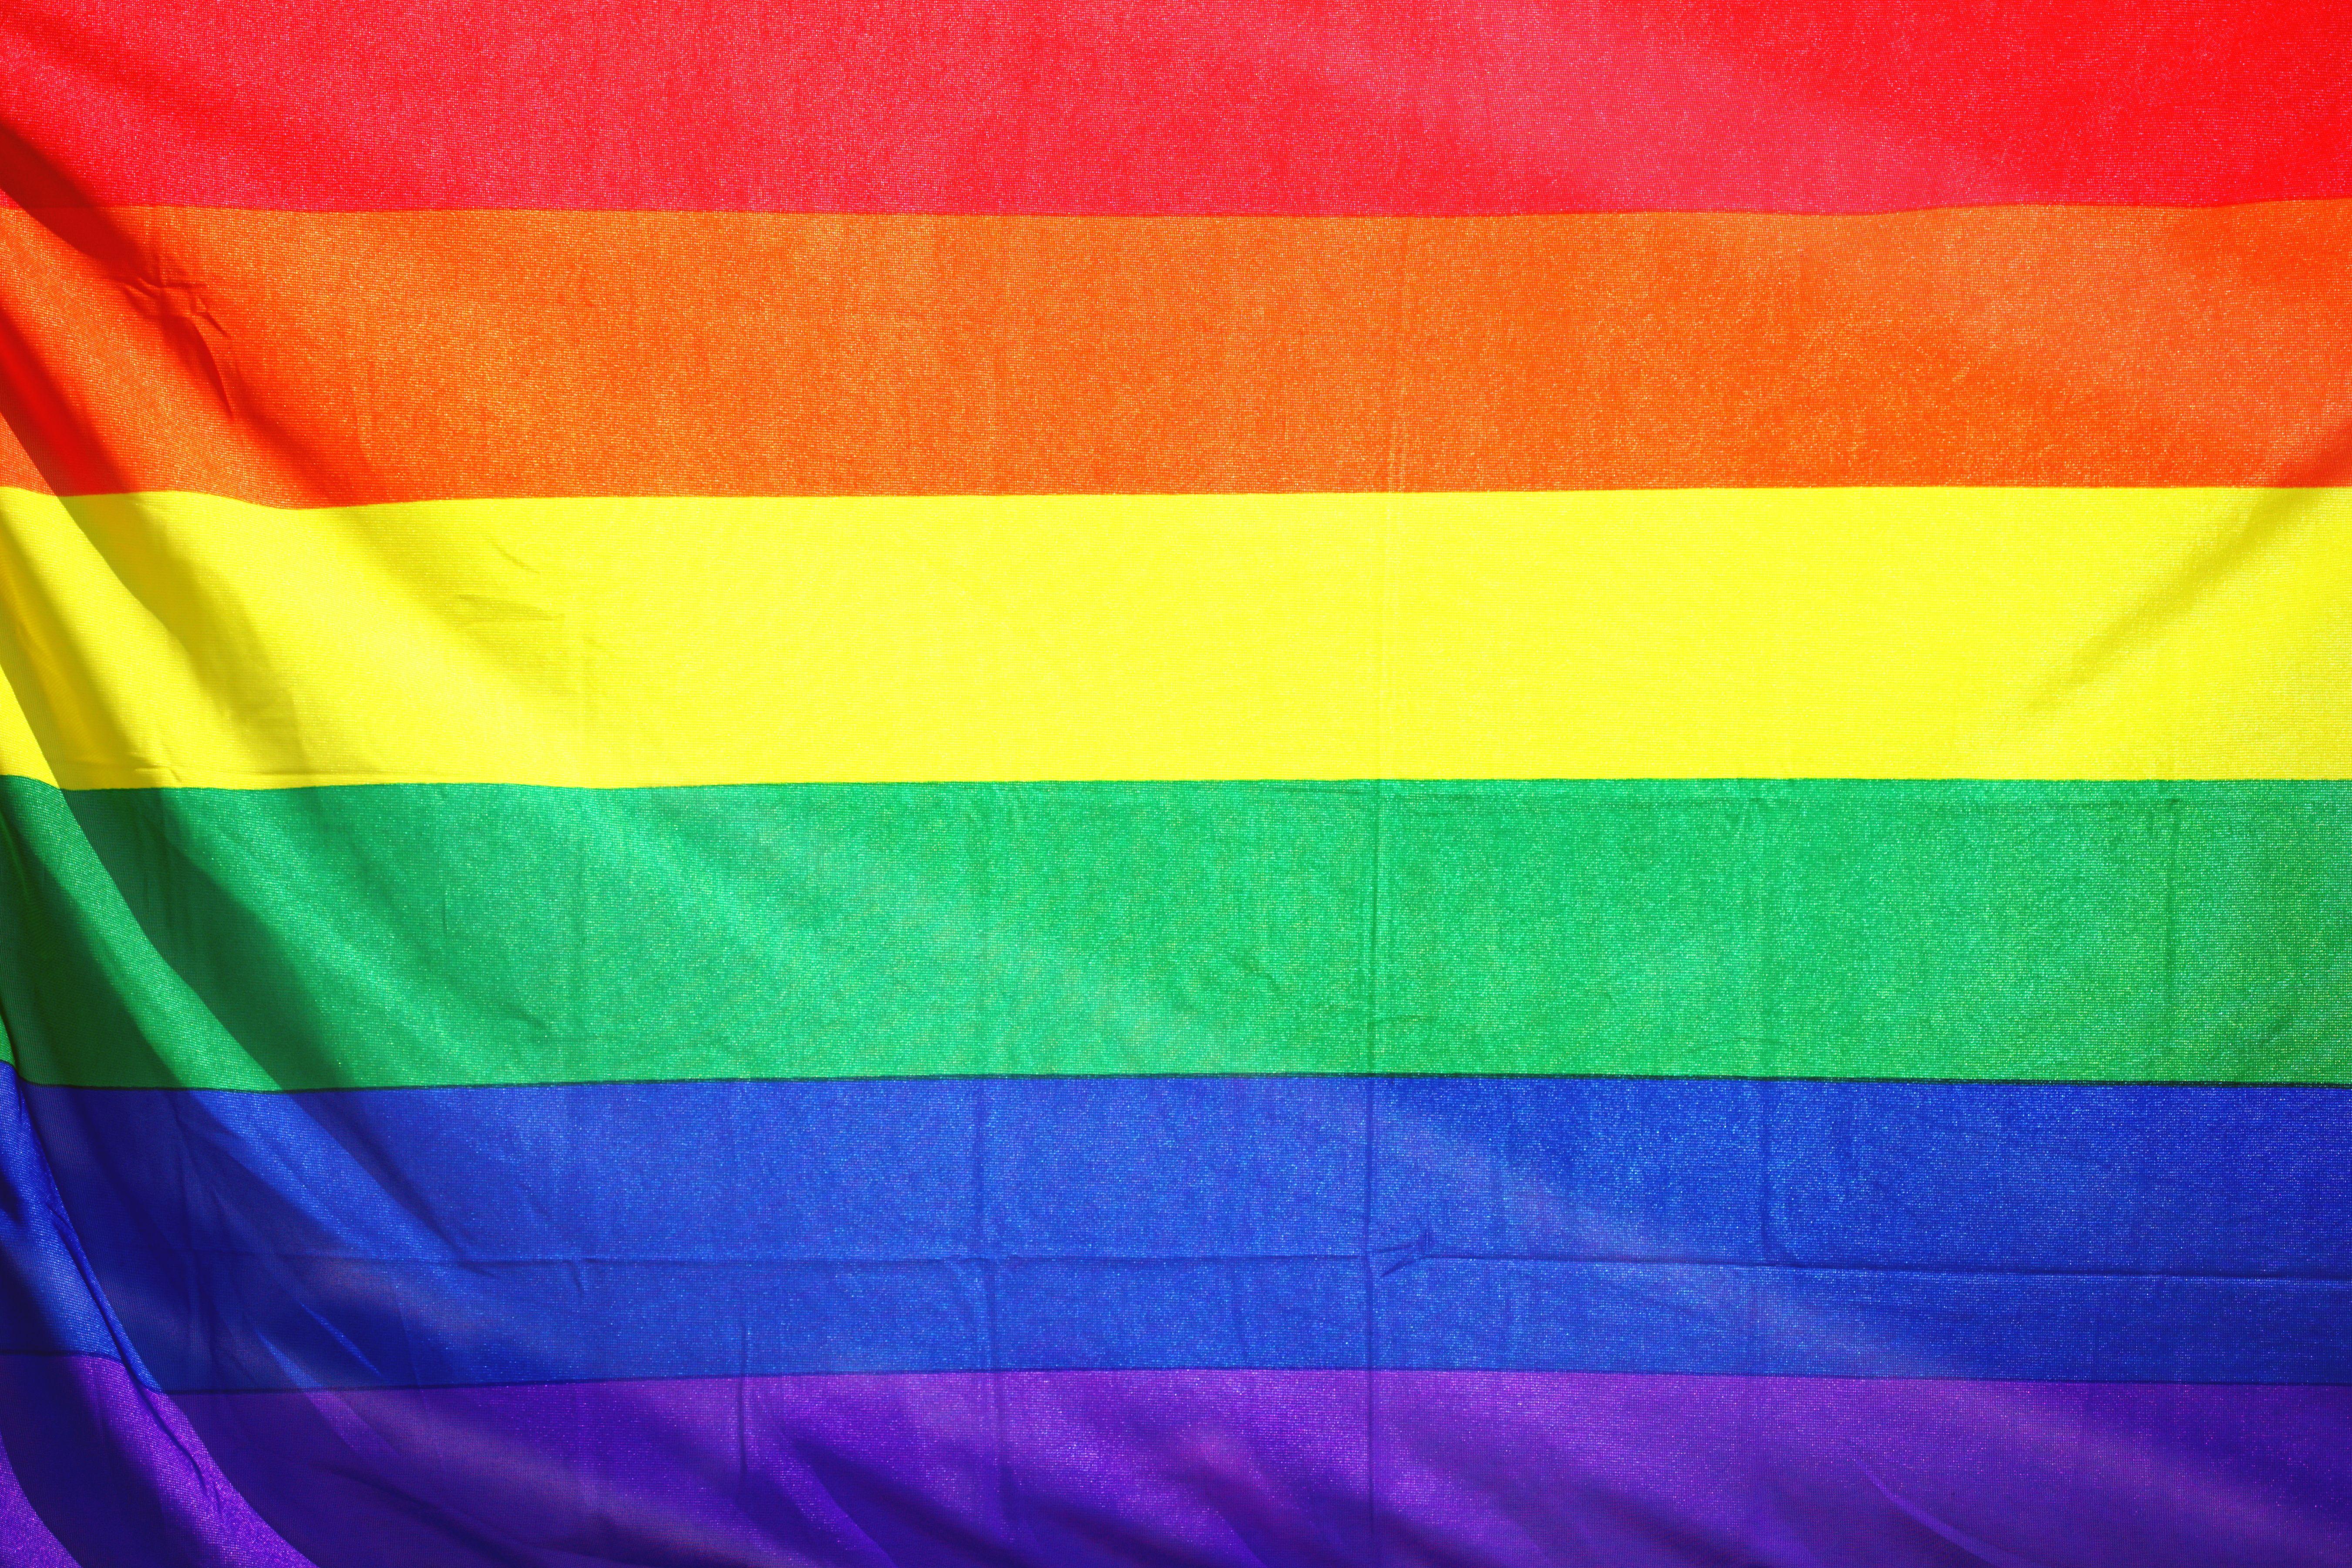 LGBT Flag Wallpapers - Top Free LGBT Flag Backgrounds ...